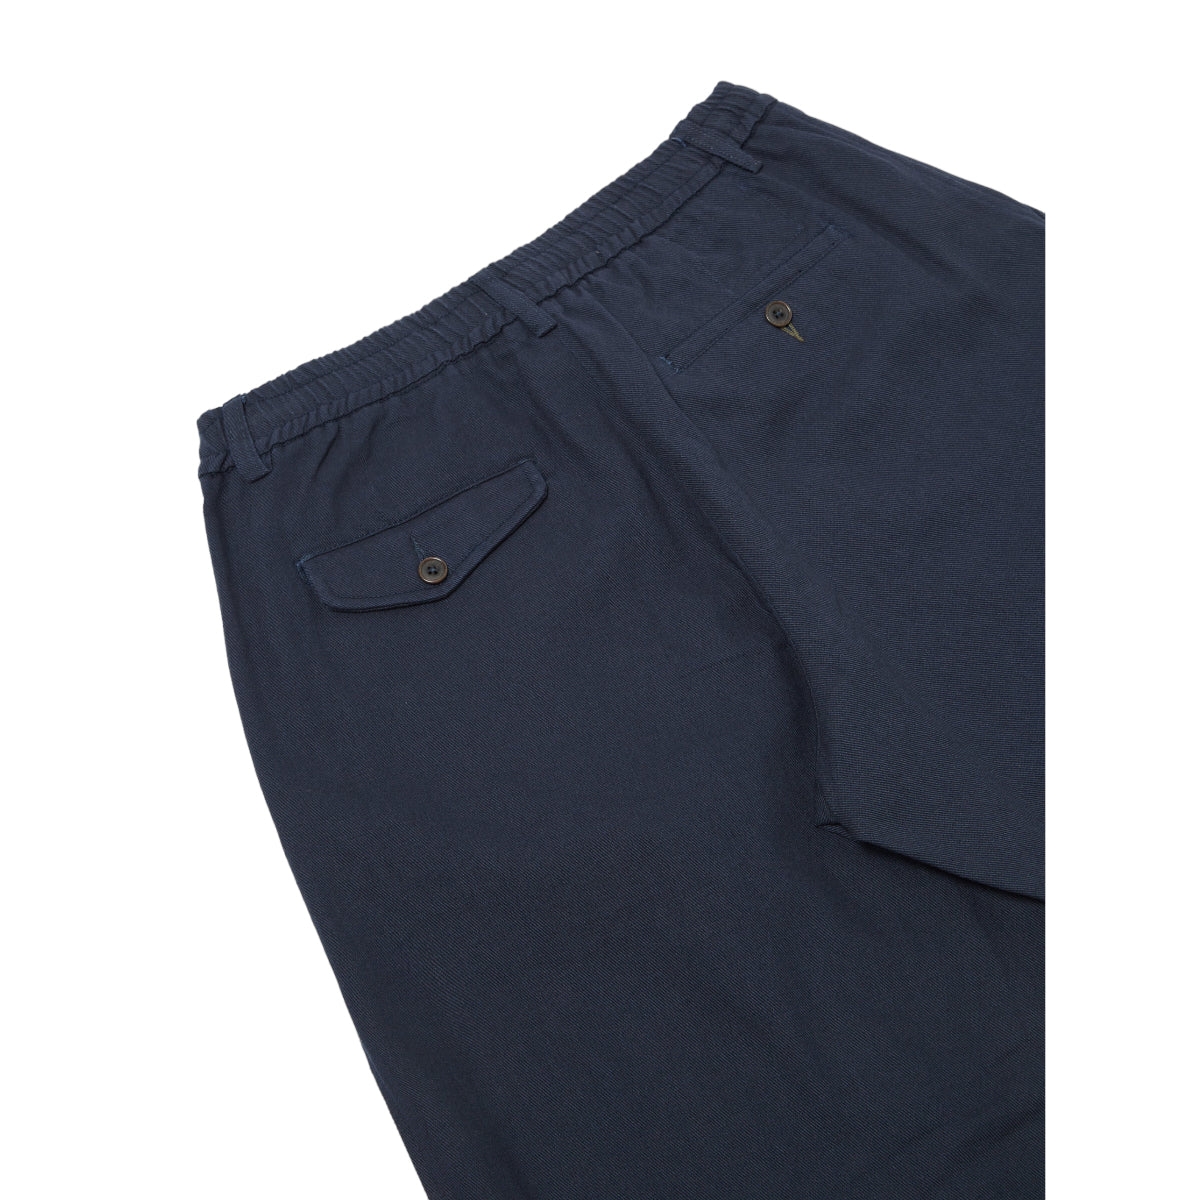 Universal Works Pleated Track Pant 29181 Winter Twill navy